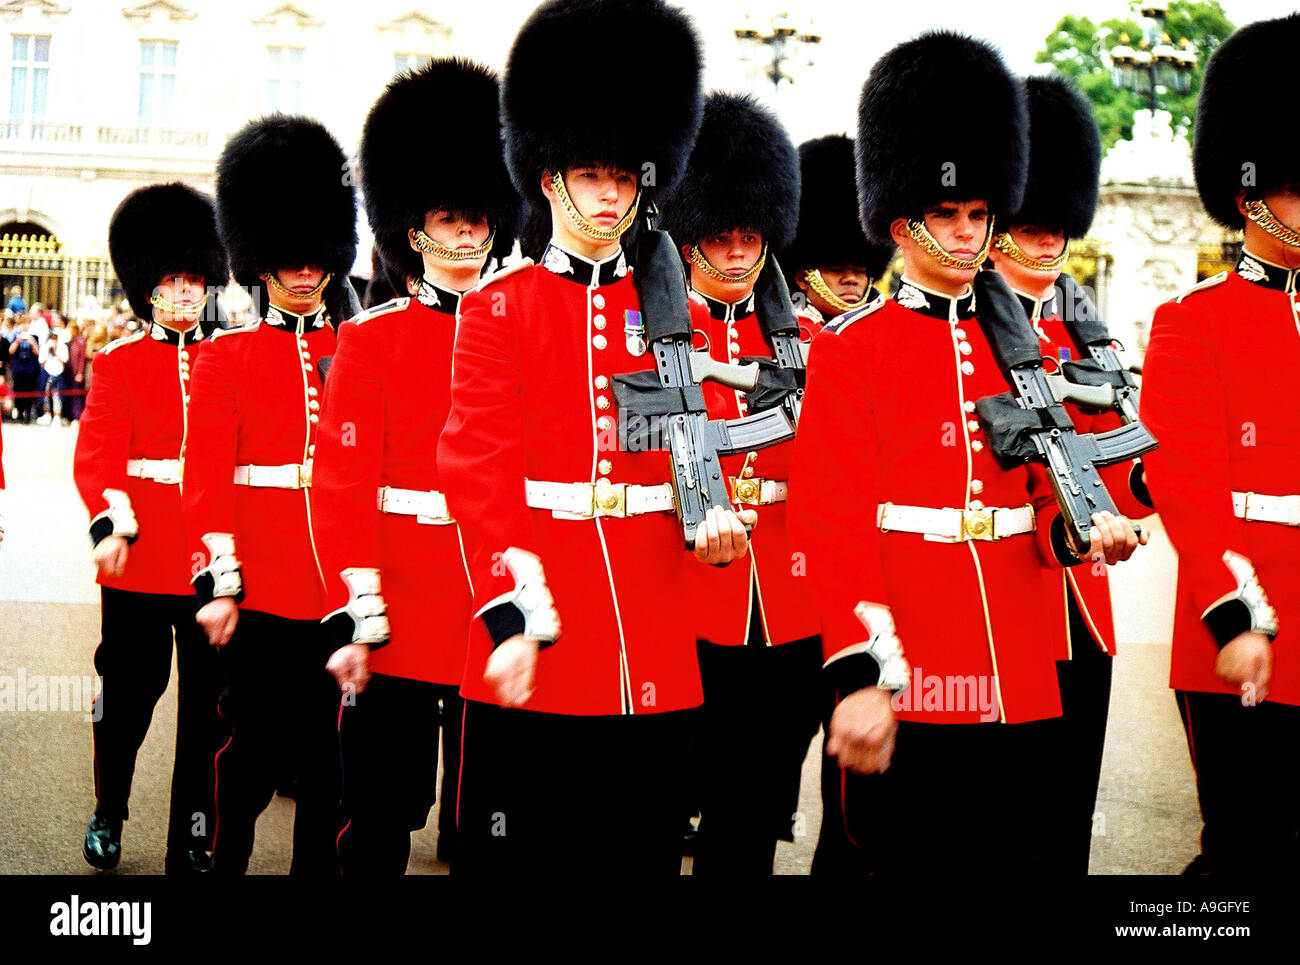 Royal Guards, marching in front of the Buckingham Palace, Changing of the Guards Militaer, Parade, Waffen, Gewehr, Reihenfolge, Stock Photo